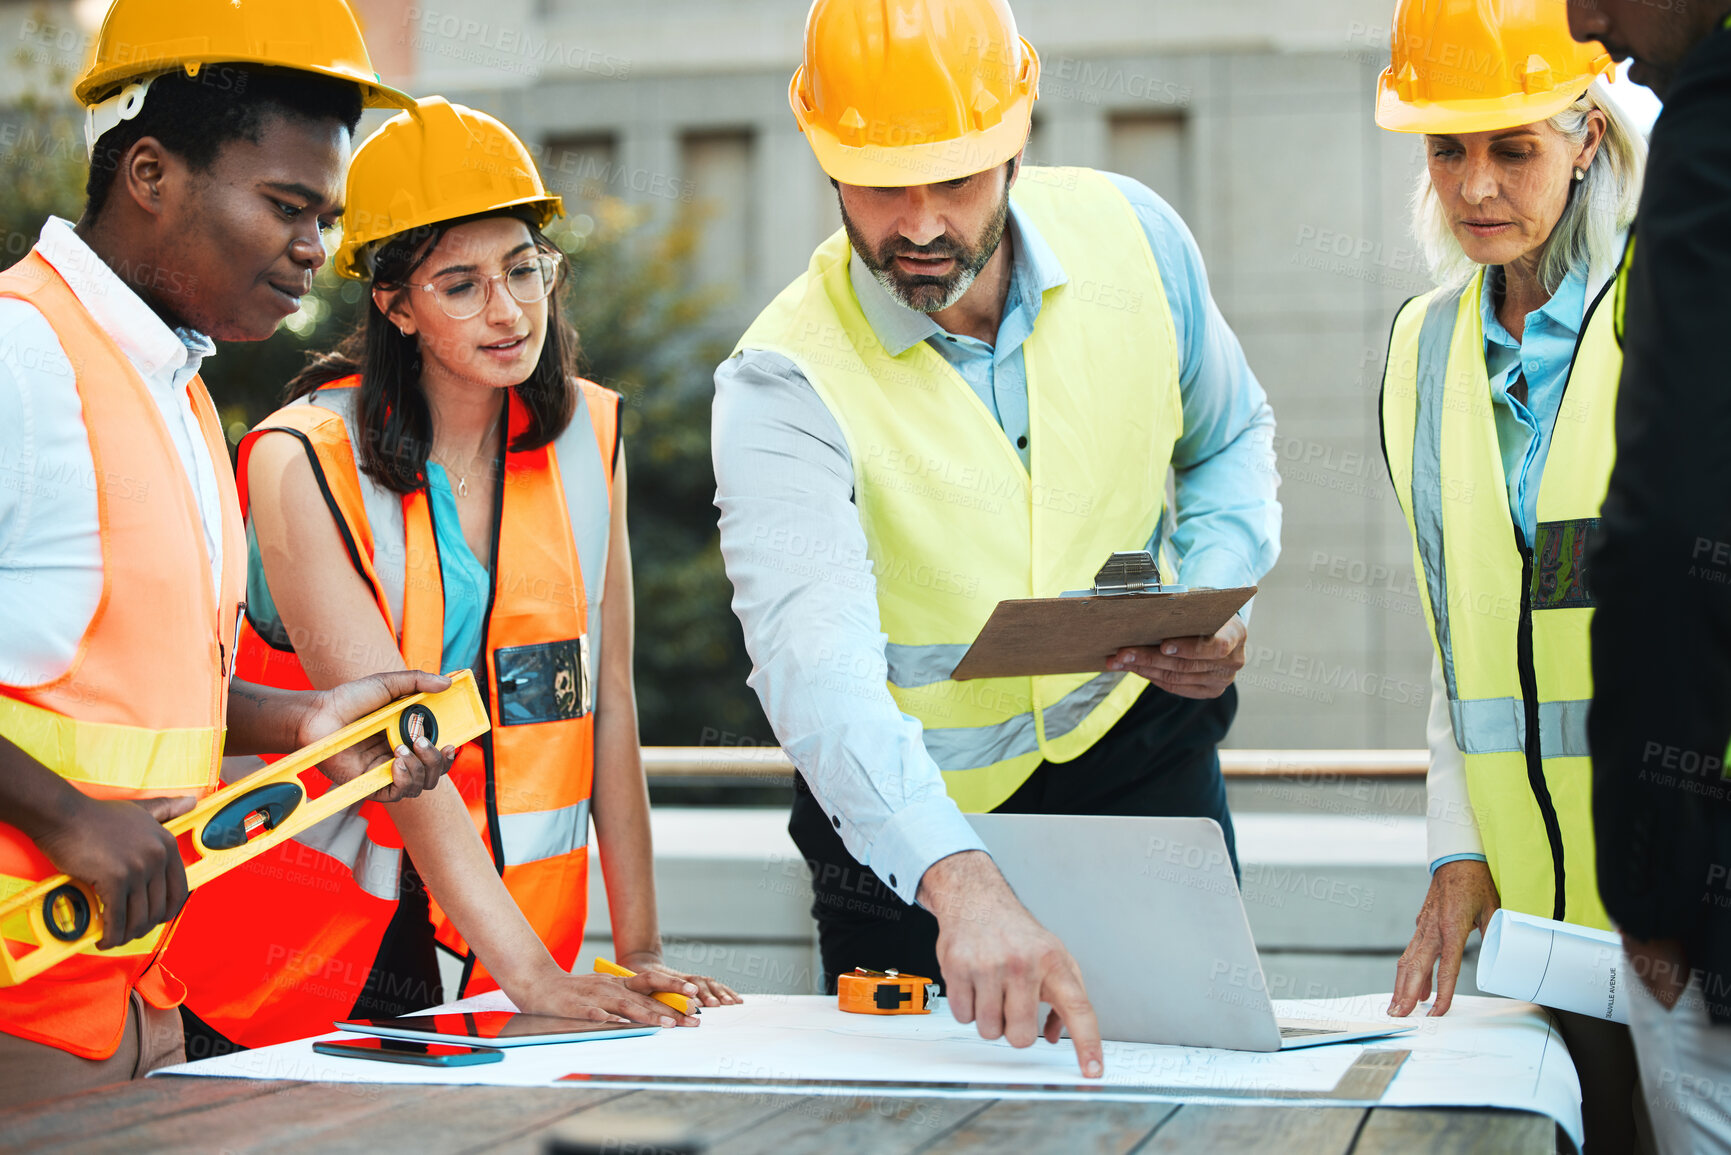 Buy stock photo Shot of a diverse group of contractors standing outside together and having a discussion over building plans